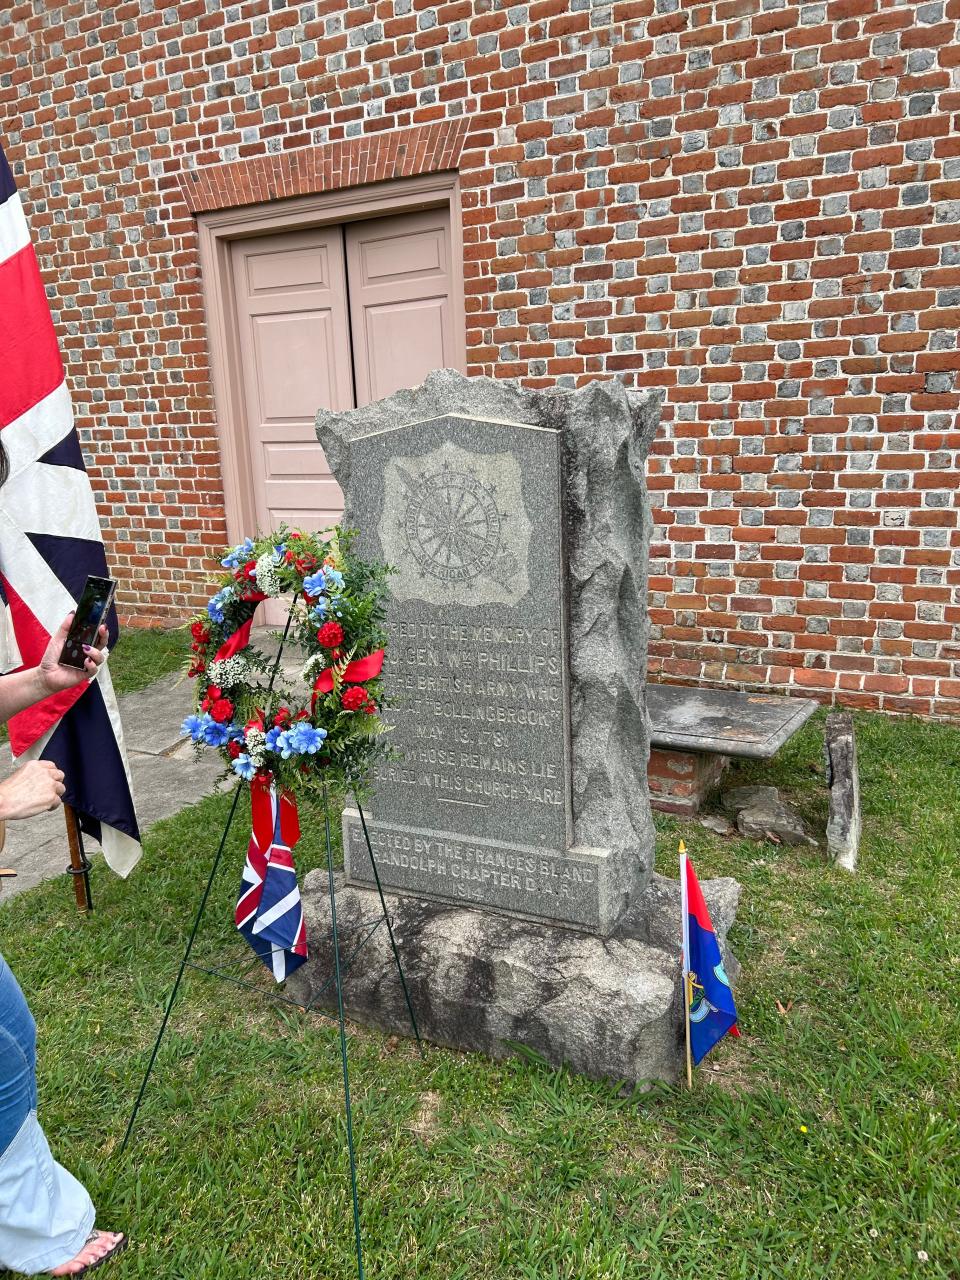 A marker honoring the late Maj. Gen. William Phillips is adorned with British flags and a wreath Saturday, May 13, 2023 at Blandford Church in Petersburg. Saturday marked the 242nd anniversary of Phillips’ death during the Battle of Petersburg in the American Revolution. He is the highest-ranked English officer not buried in British soil.